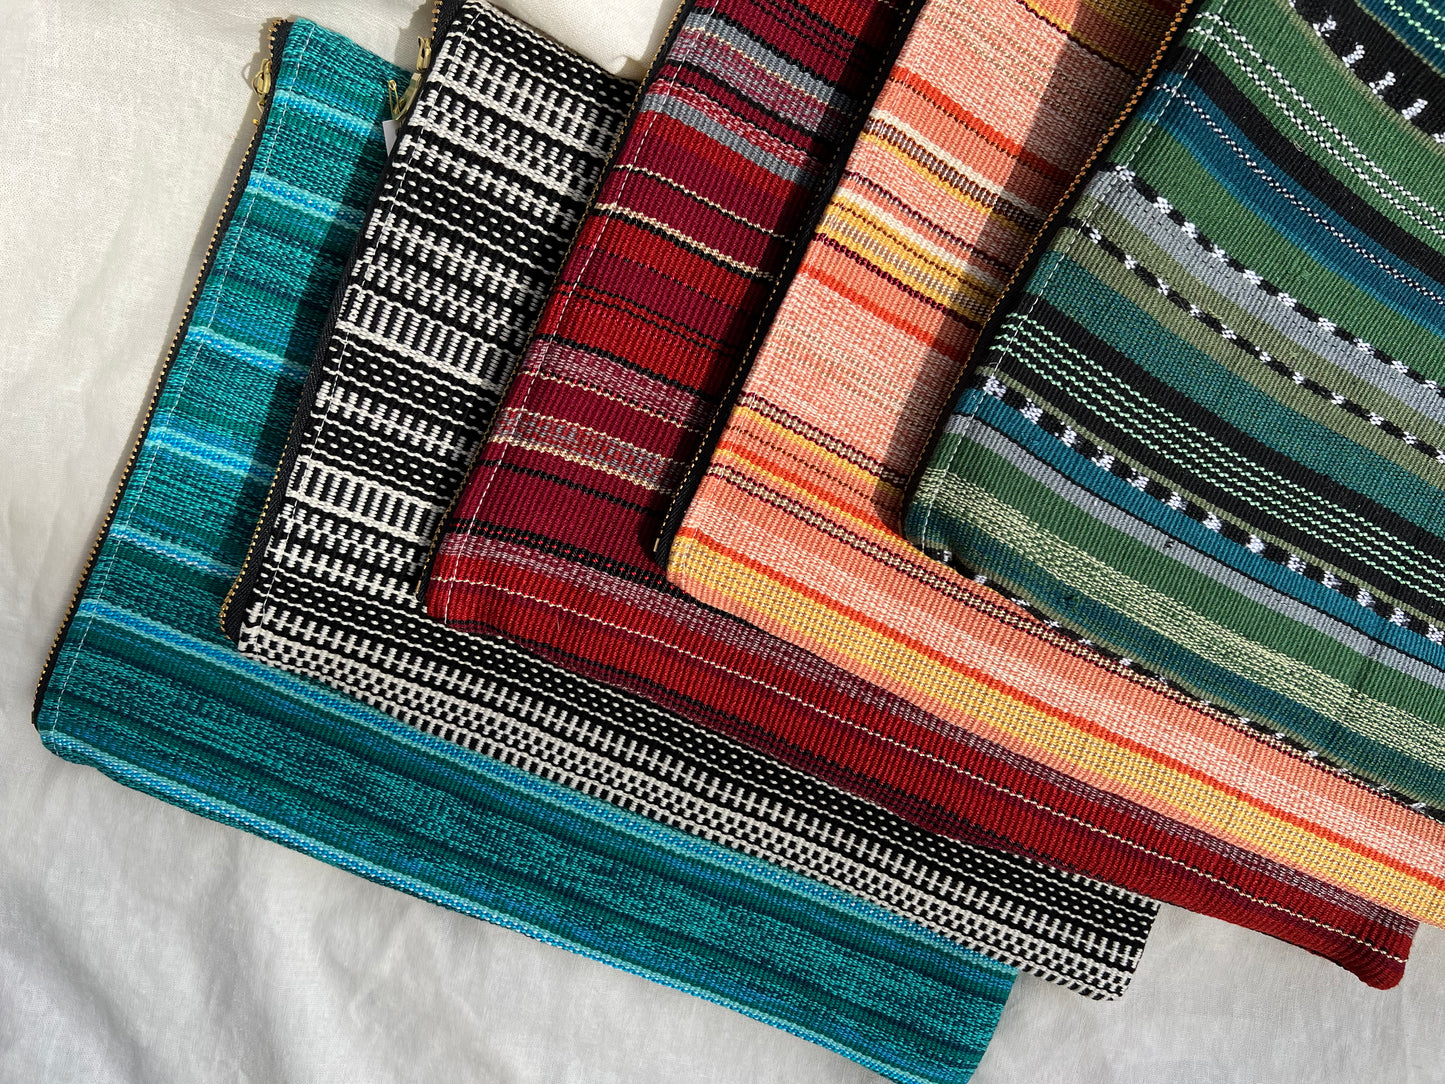 Handmade iPad Case made from fair trade textiles. This handmade iPad case features a naturally-dyed and fair trade textile from Guatemala. It is sewn by a resettled refugee paid above a living wage in San Diego, California. 